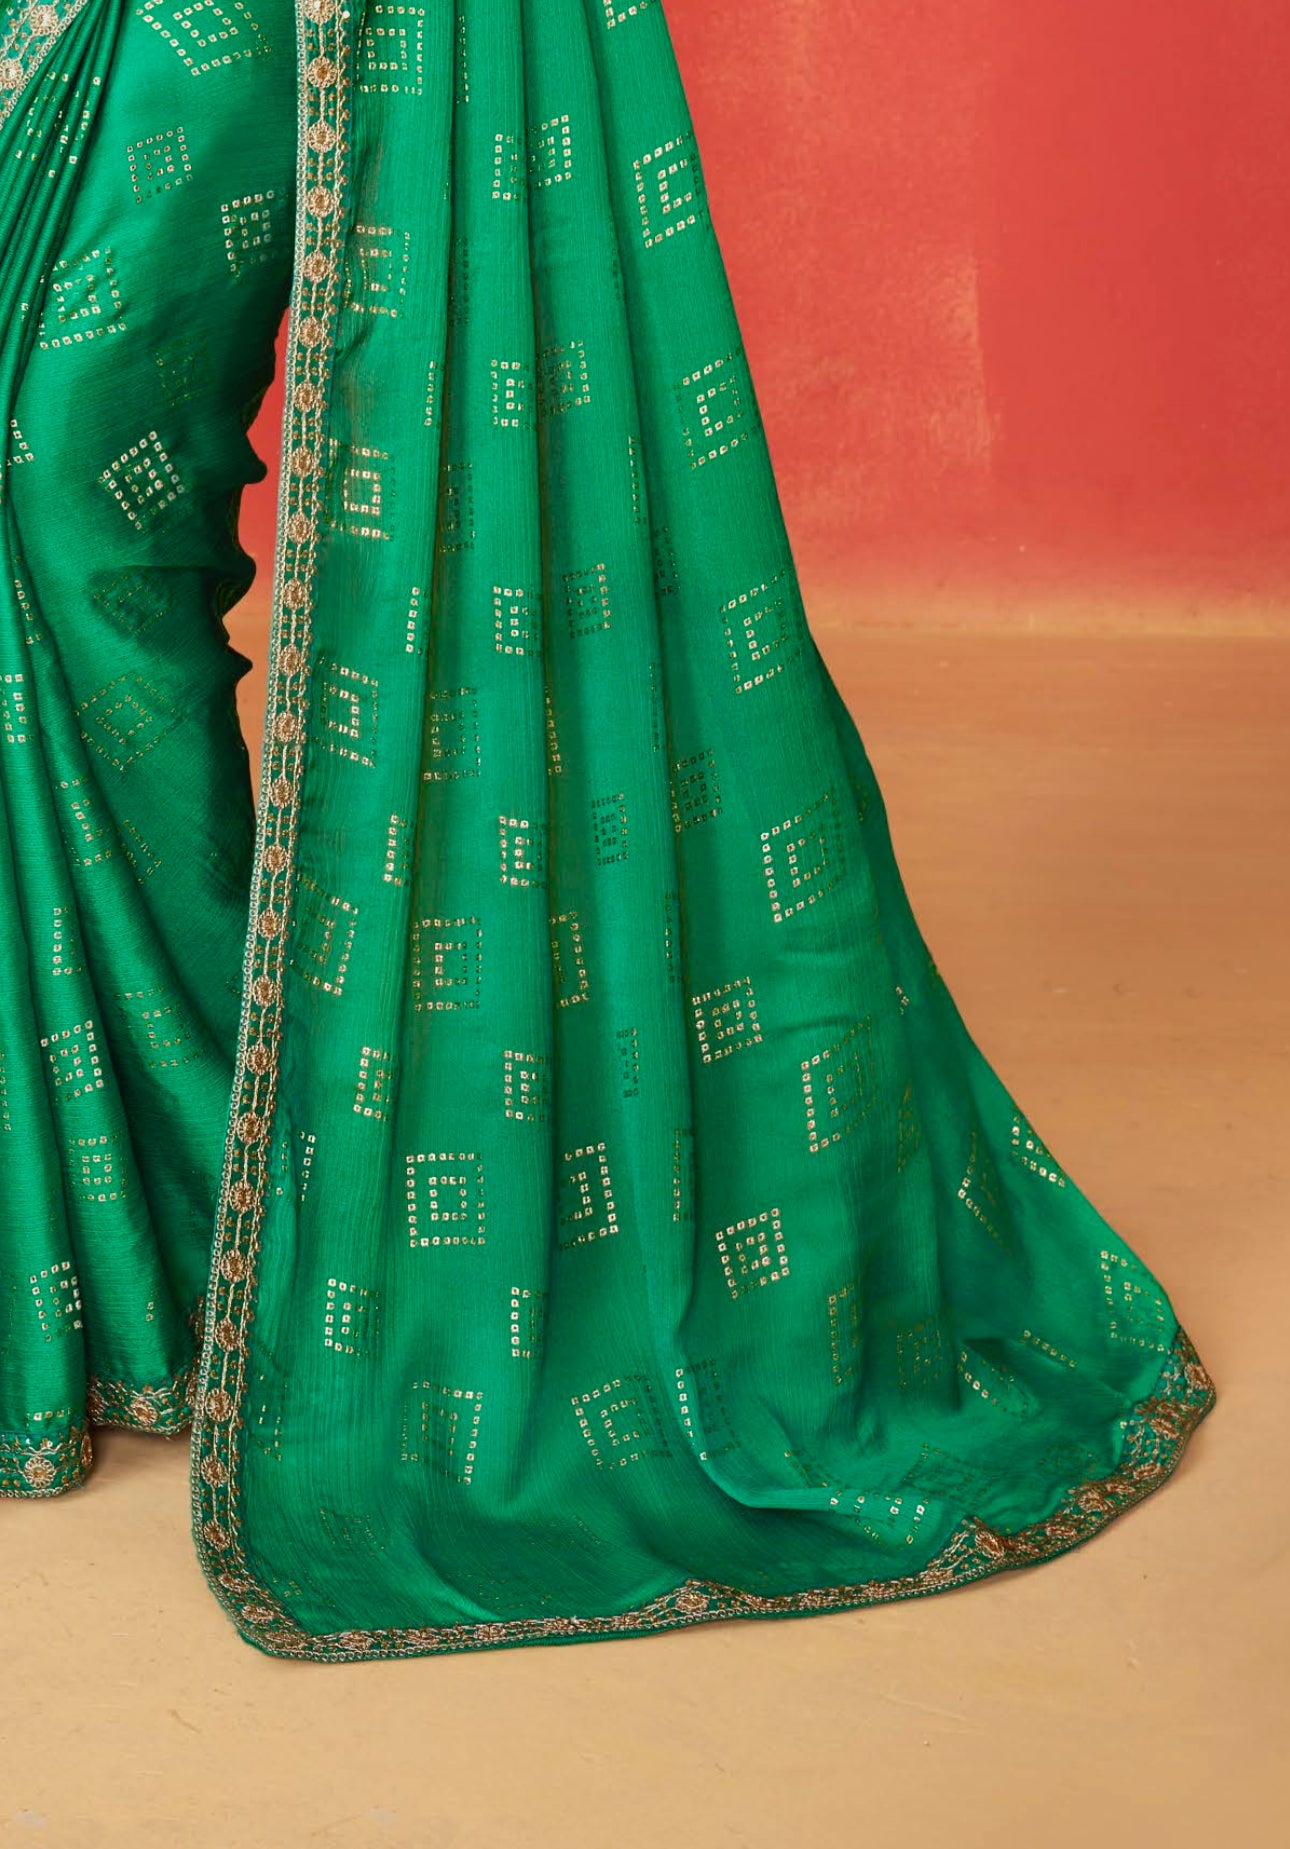 Green Haze Moss Chiffon Foil Mill Print And Embroidery Work Border Saree With Fancy Work Blouse Sbs4